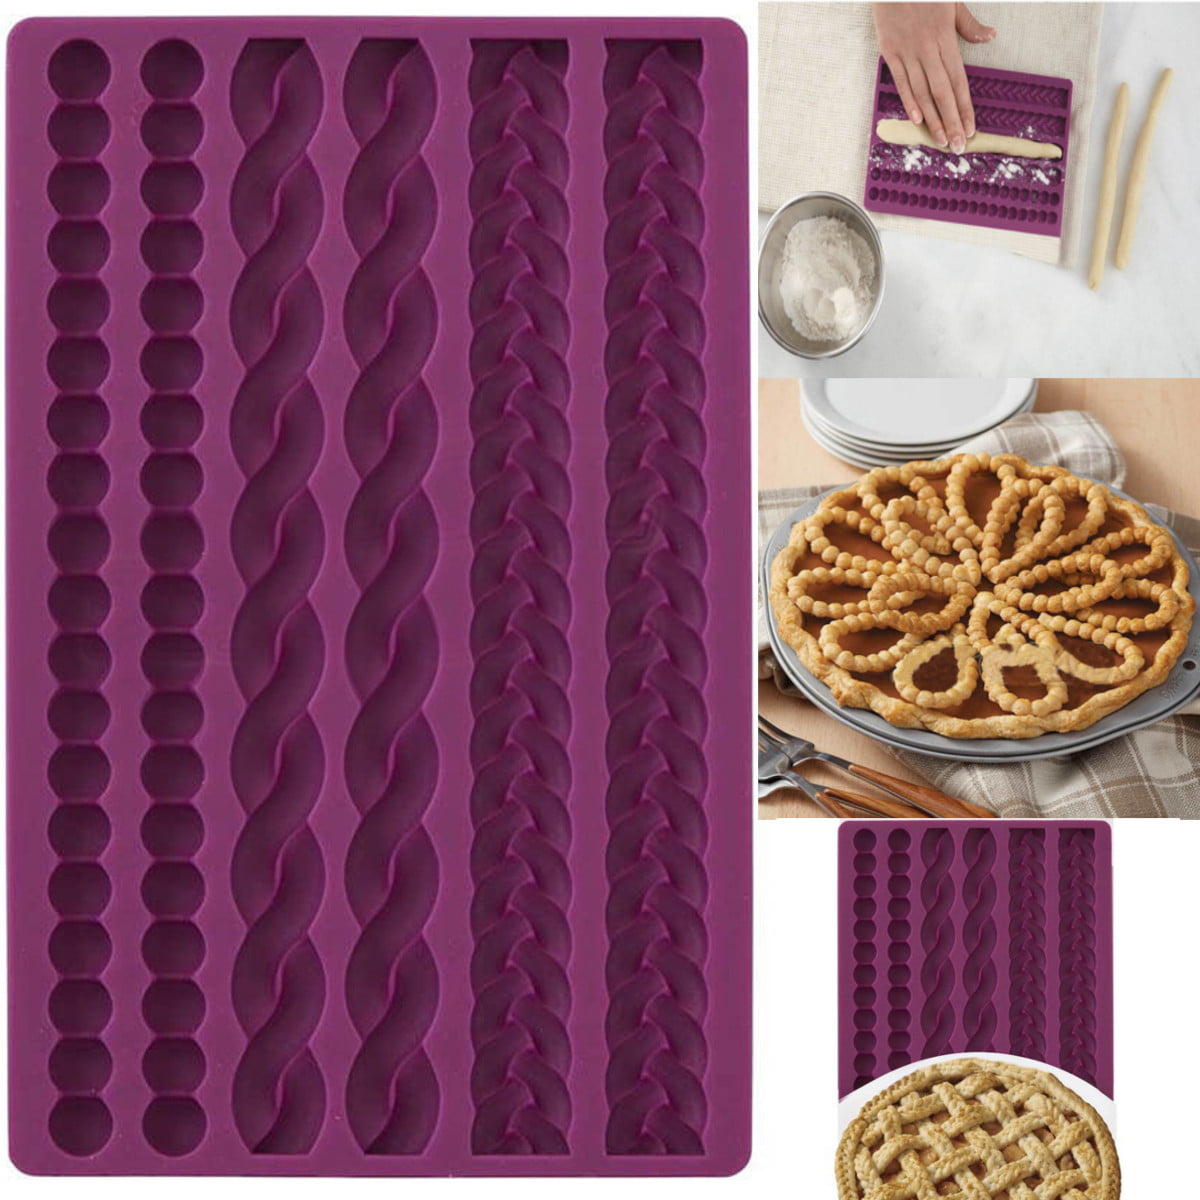 3D Knit Rope Silicone Fondant Cake Mold Sugarcraft Border Chocolate Icing Mould 